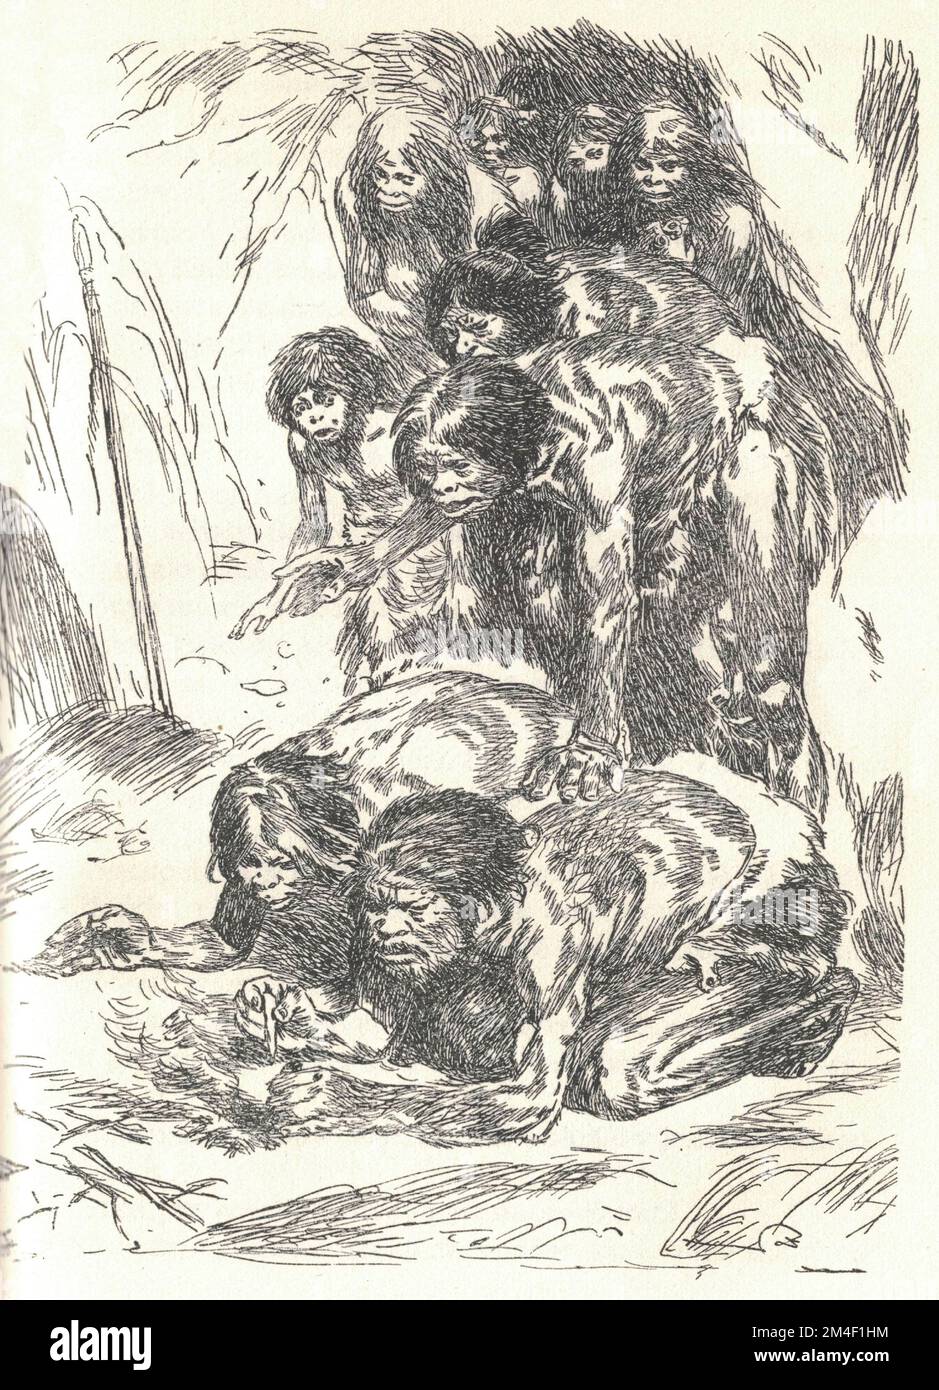 Neanderthals trying to start a fire. Depiction of a prehistoric culture. Old black and white illustration. Vintage drawing. Illustration by Zdenek Burian. Zdenek Michael Frantisek Burian (11 February 1905 in Koprivnice, Moravia, Austria-Hungary 1 July 1981 in Prague, Czechoslovakia) was a Czech painter, book illustrator and palaeoartist whose work played a central role in the development of palaeontological reconstruction. Originally recognised only in his native Czechoslovakia, Burian's fame later spread to an international audience during a remarkable career spanning six decades (1930s to 19 Stock Photo